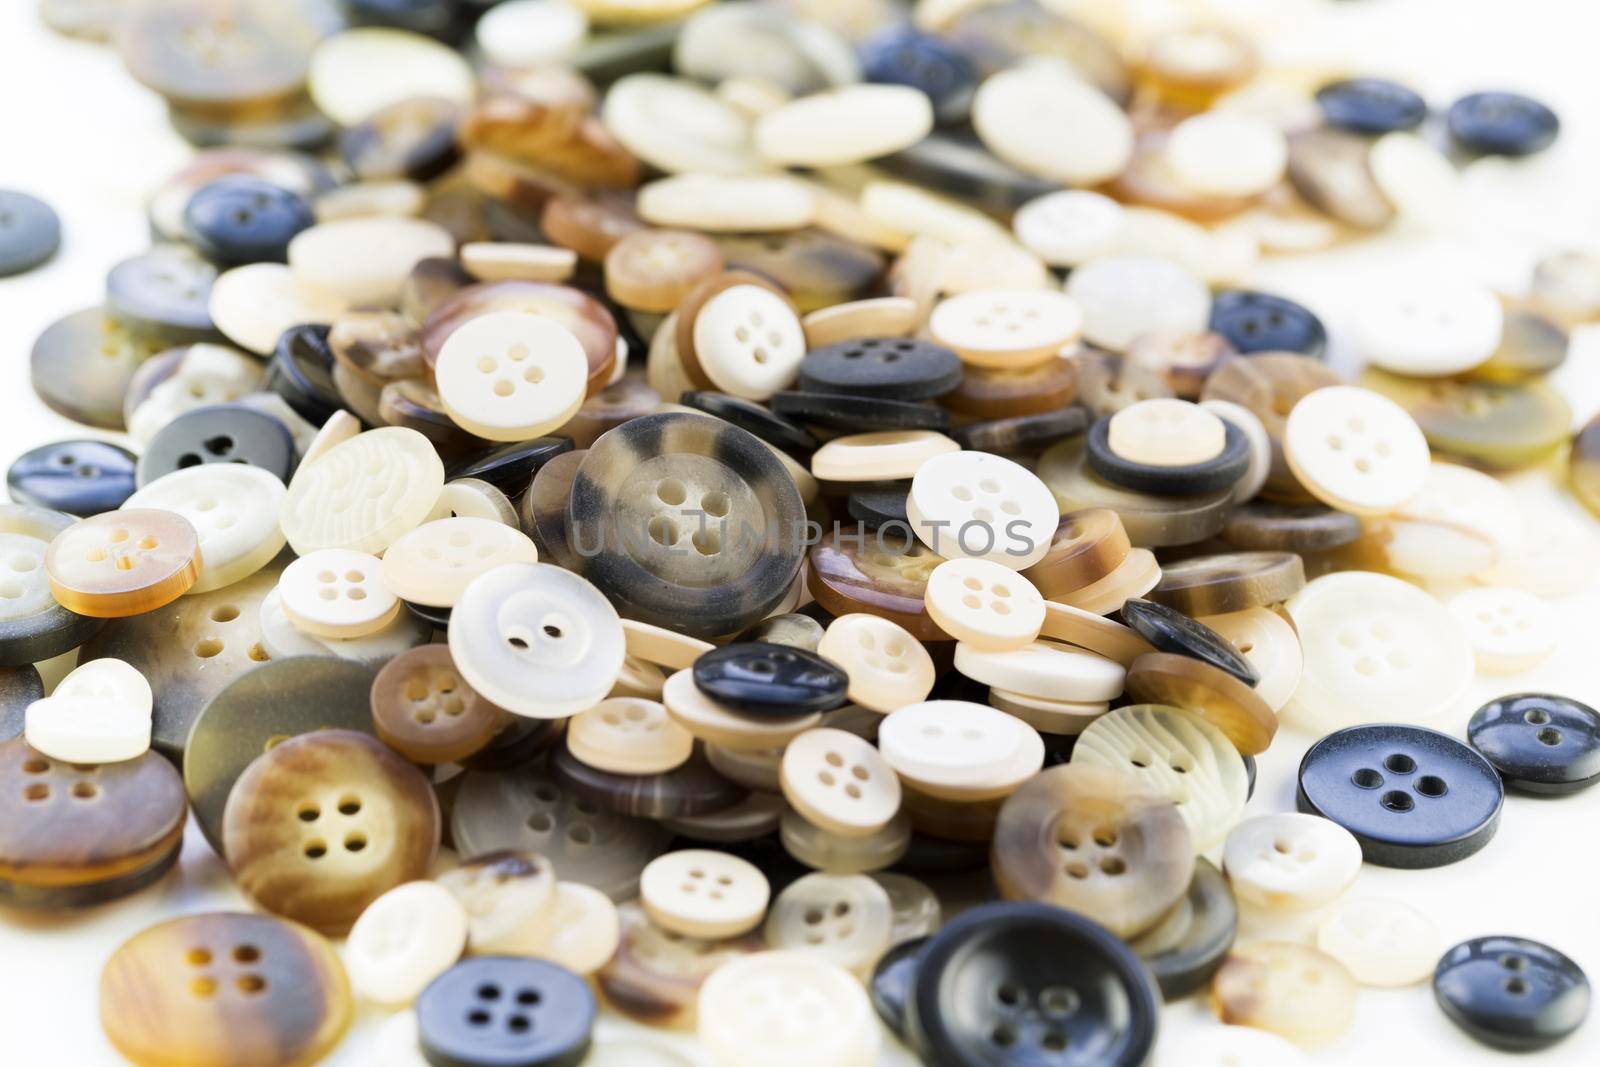 Pile of buttons in browns, white and black tones.